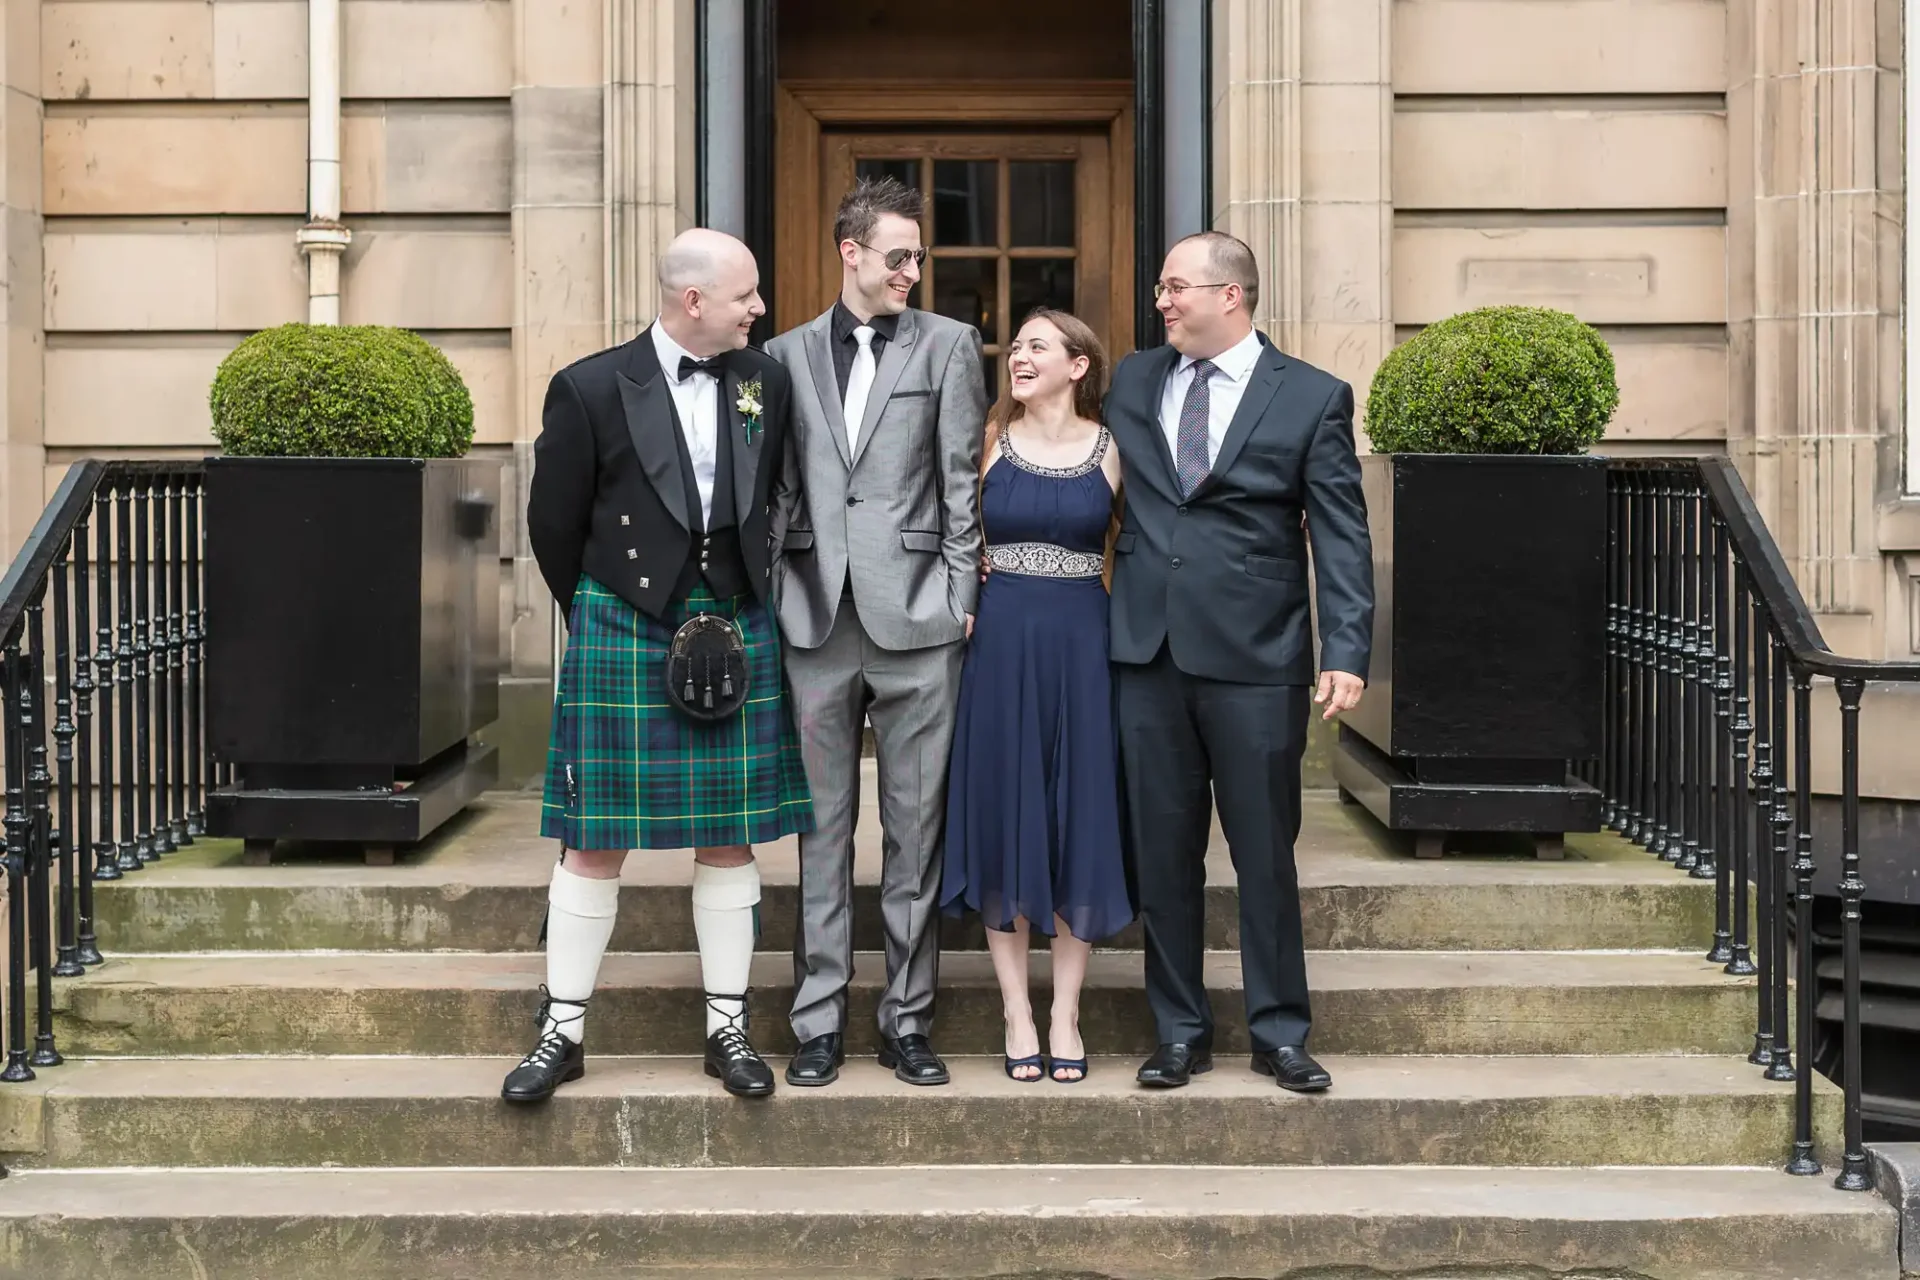 Four people smiling on steps outside a building, one man in traditional scottish kilt, others in formal wear.